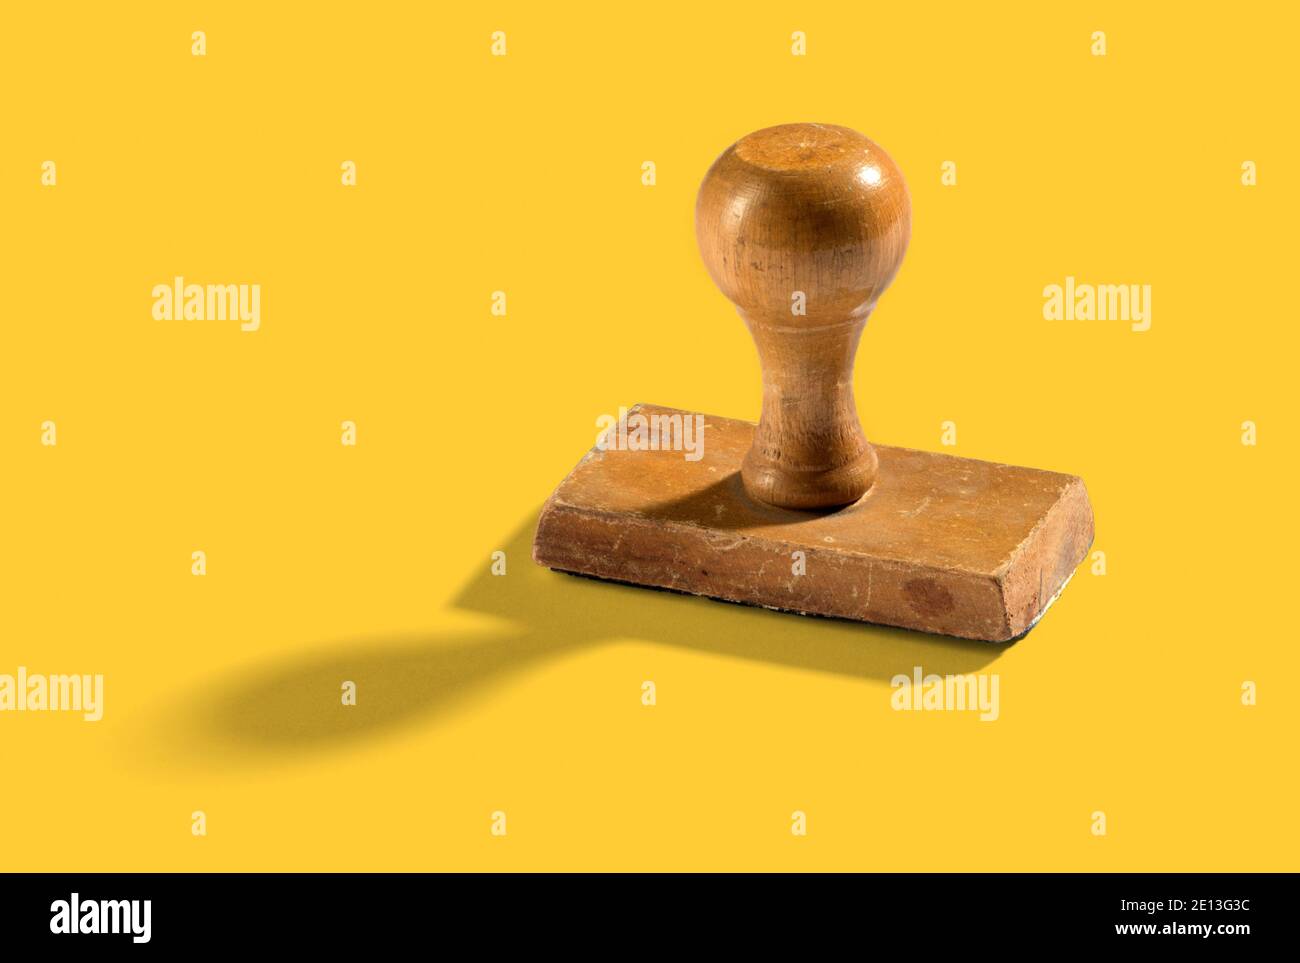 Wooden vintage hand stamp standing upright on yellow background with a shadow and copy space alongside Stock Photo